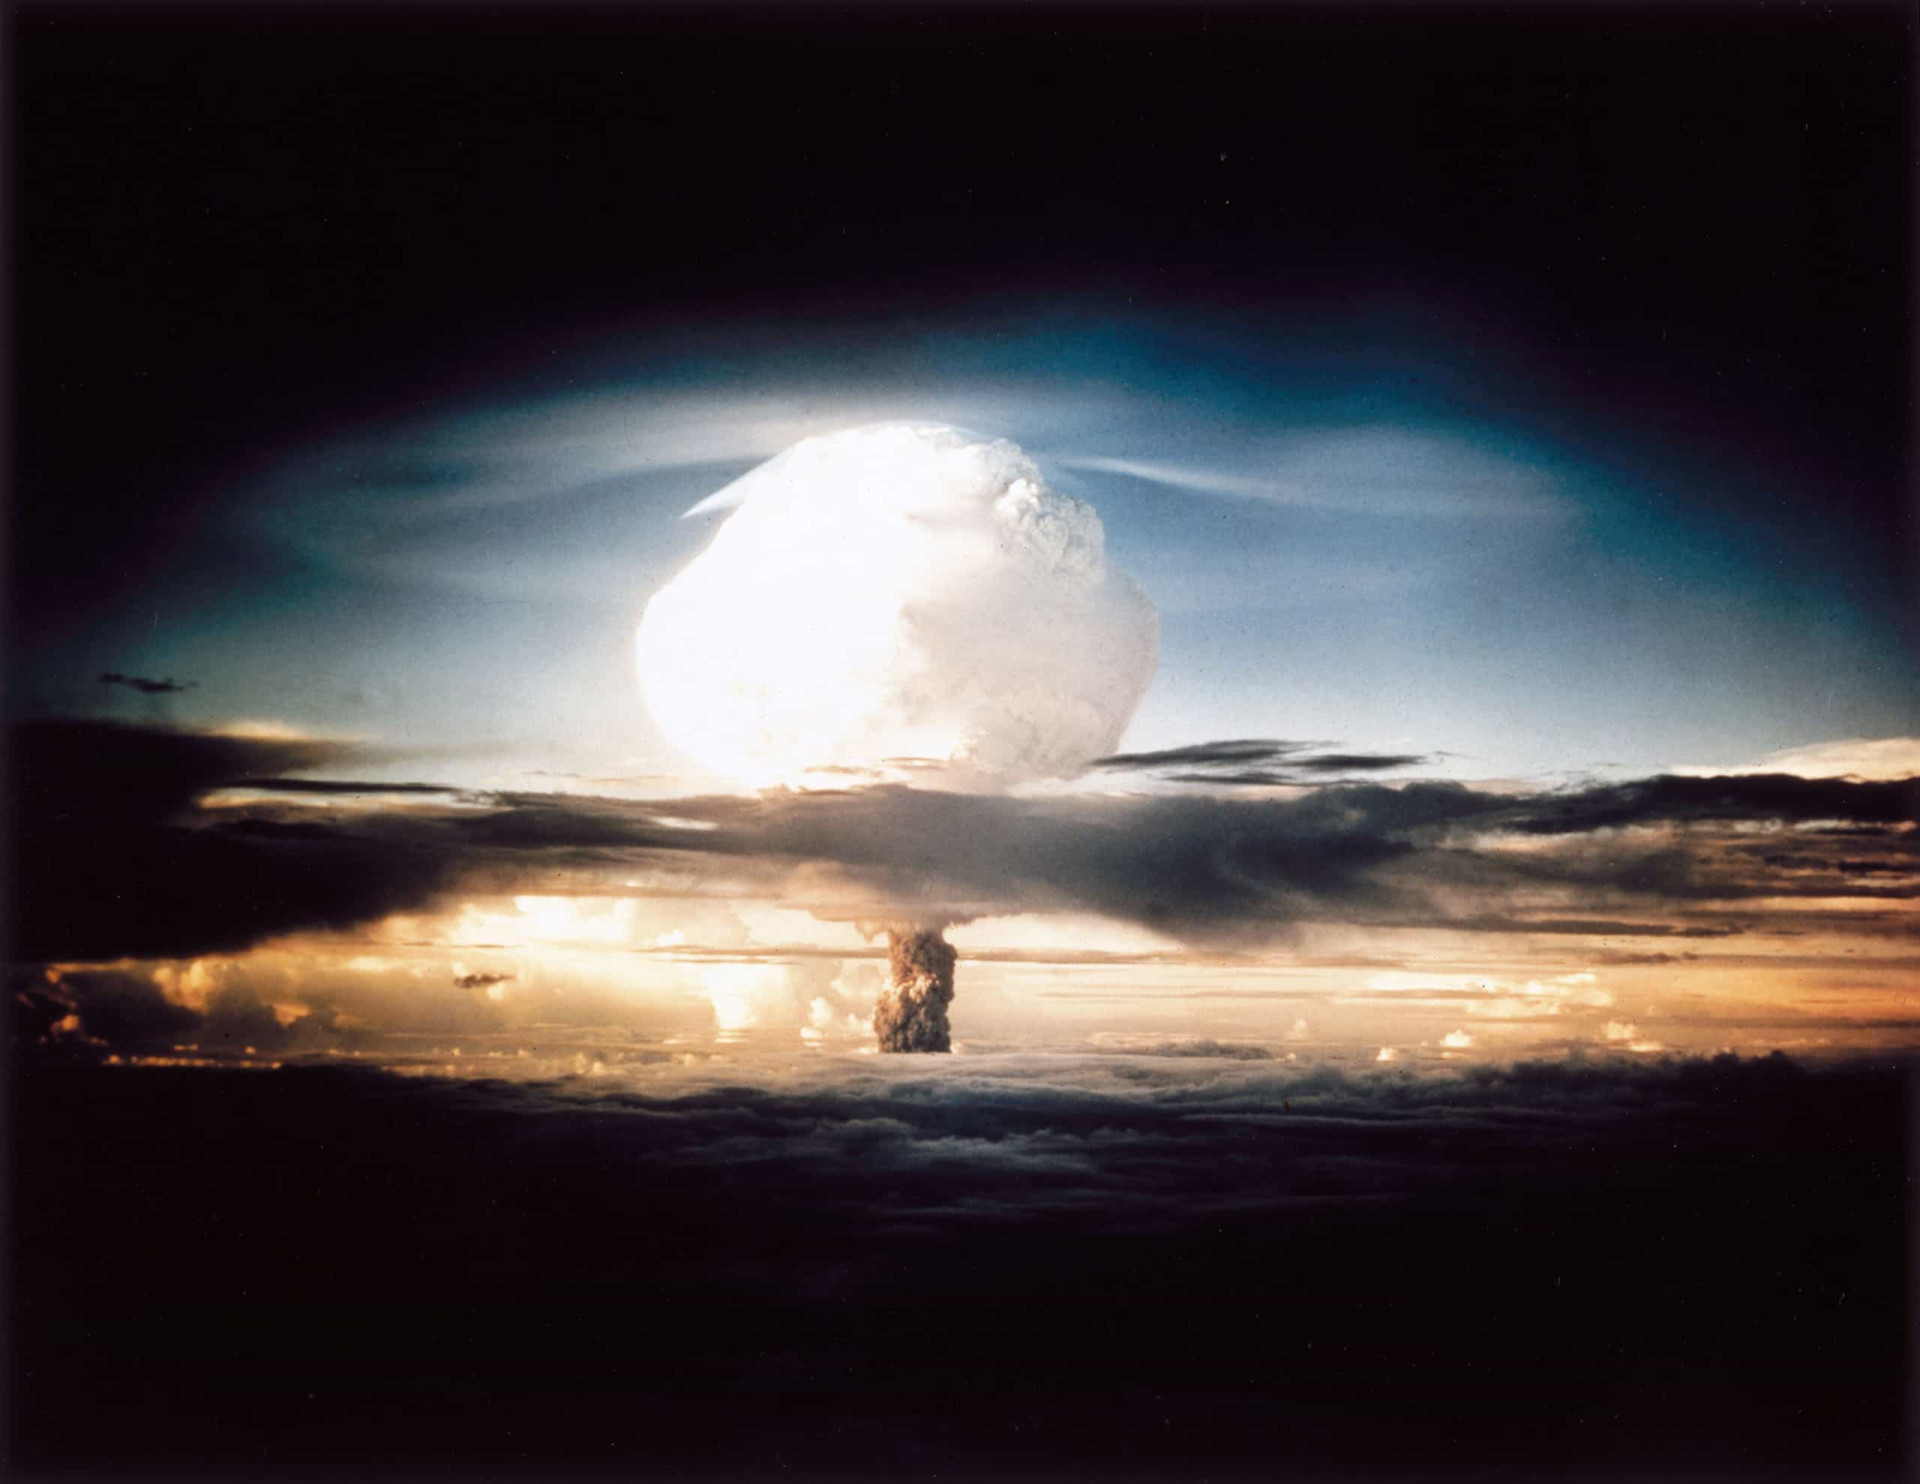 <p>The United States tests its first thermonuclear device, in November 1952 at Eniwetok Atoll in the Pacific Proving Ground in the Marshall Islands, as part of Operation Ivy. The USSR responds with a similar test in August 1953. This remained the clock's closest approach to midnight (tied in 2018) until 2020.</p><p>You may also like:<a href="https://www.starsinsider.com/n/263077?utm_source=msn.com&utm_medium=display&utm_campaign=referral_description&utm_content=490923v3en-au"> Celebrities who lost all their money</a></p>